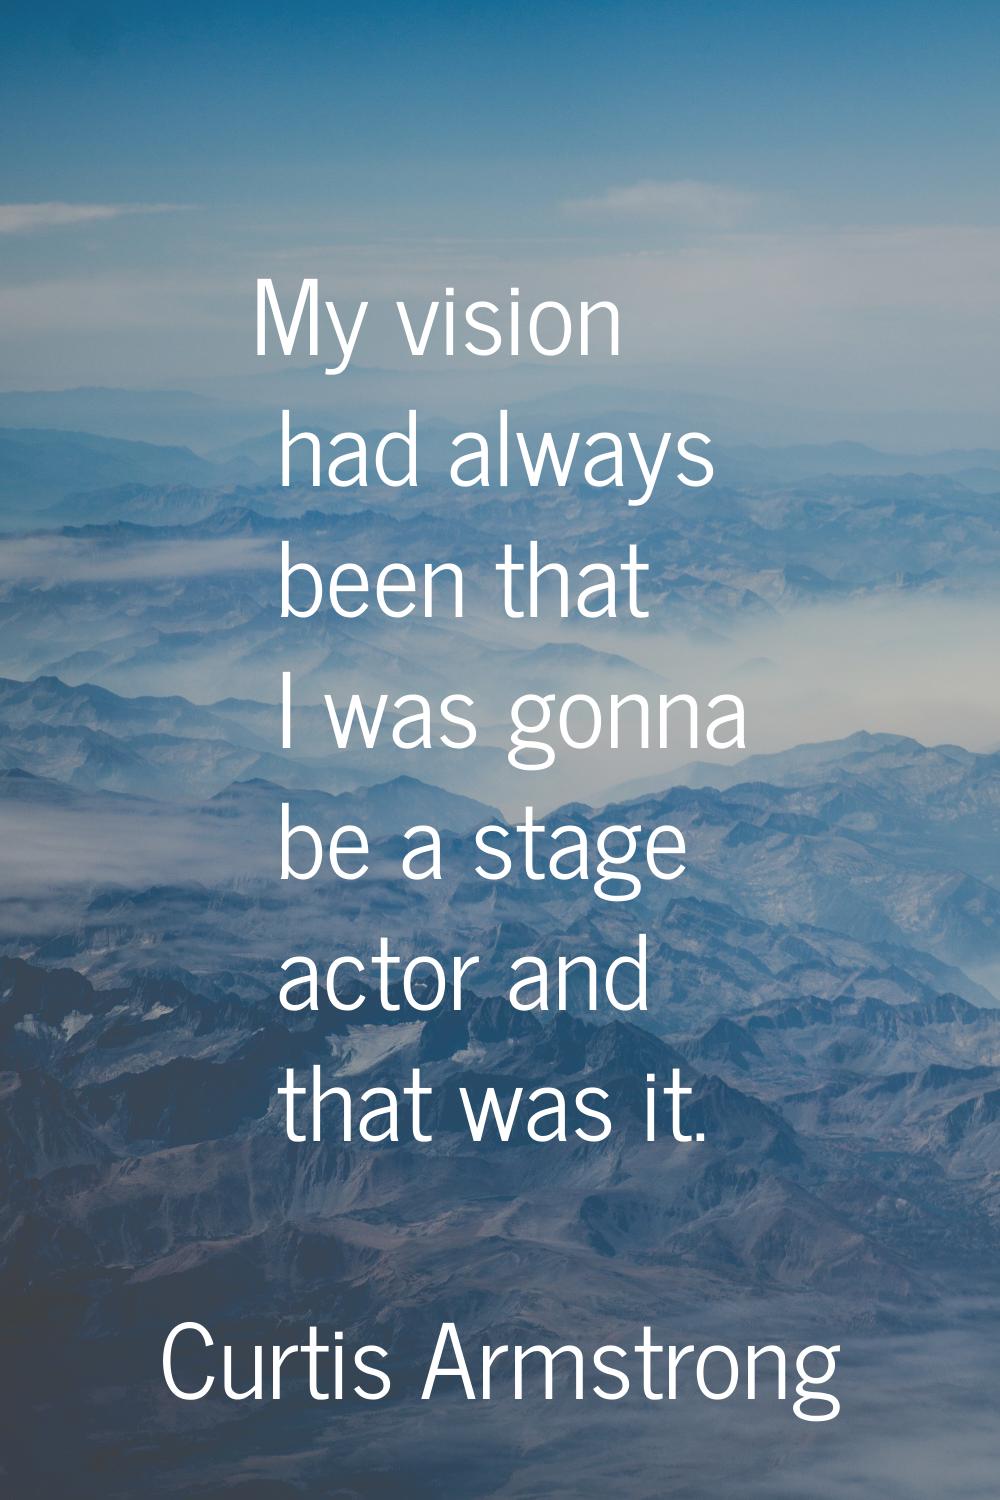 My vision had always been that I was gonna be a stage actor and that was it.